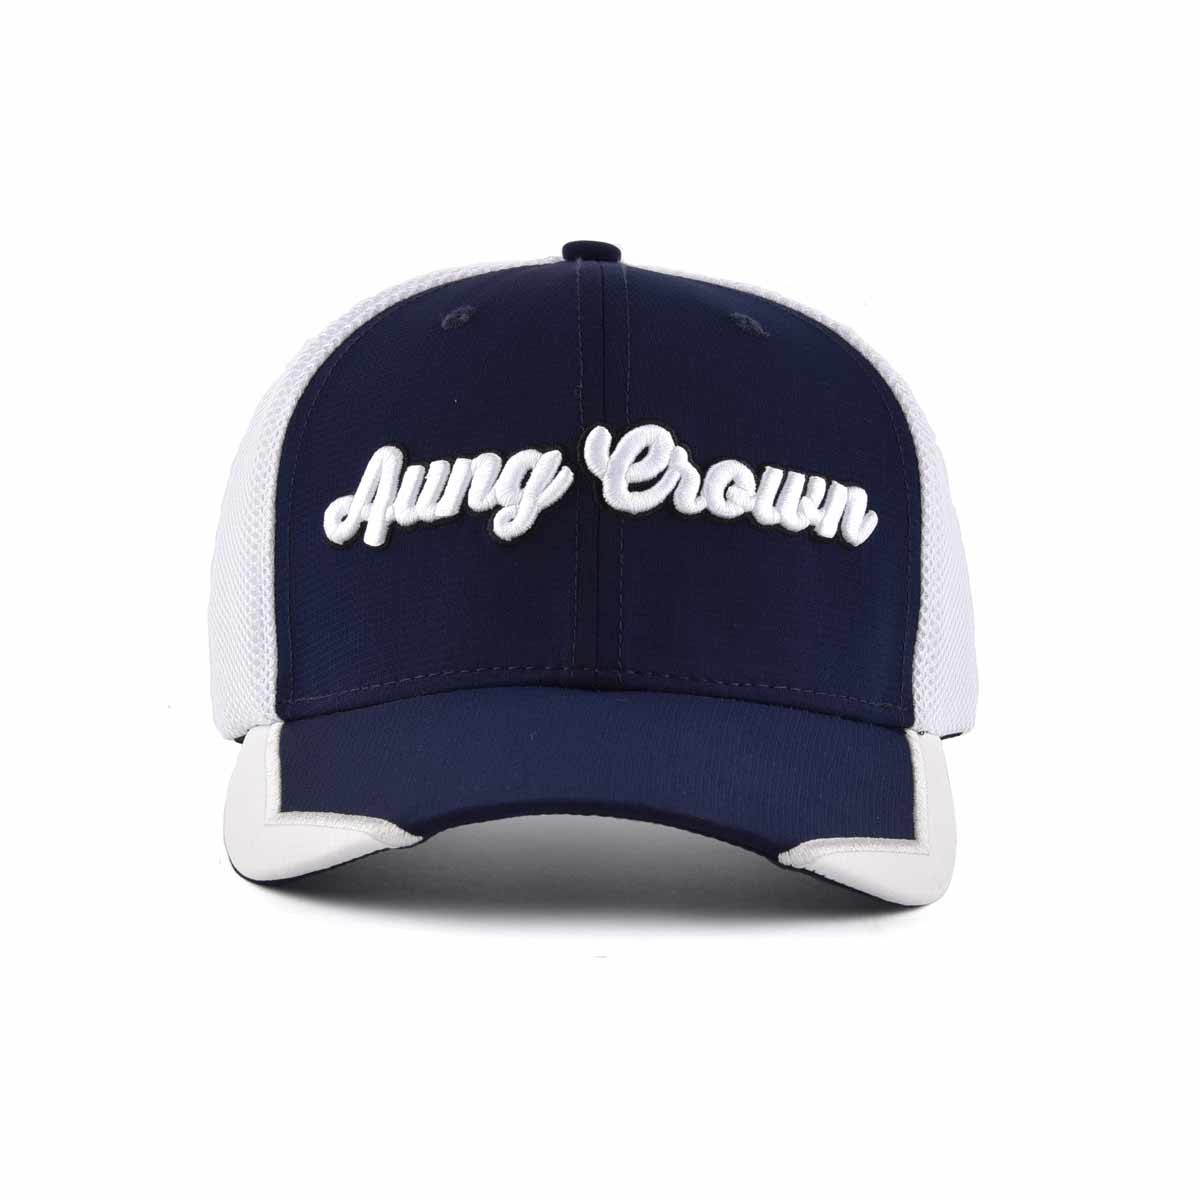 Aung-Crown-mens-white-and-blue-trucker-hat-KN2012121